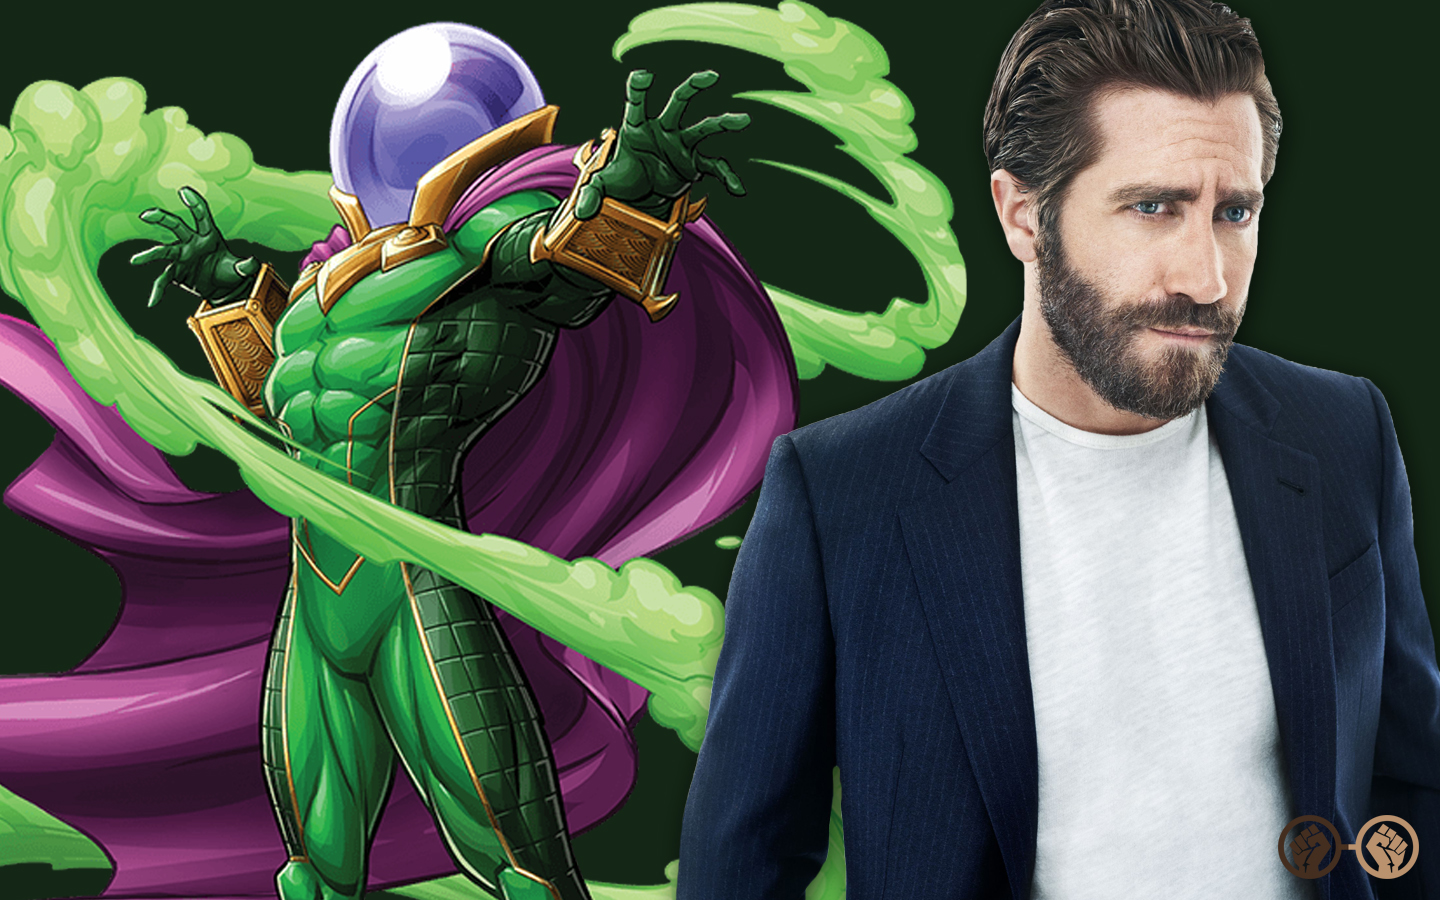 Jake Gyllenhaal In Talks to Star as Mysterio in ‘Spider-Man: Homecoming’ Sequel